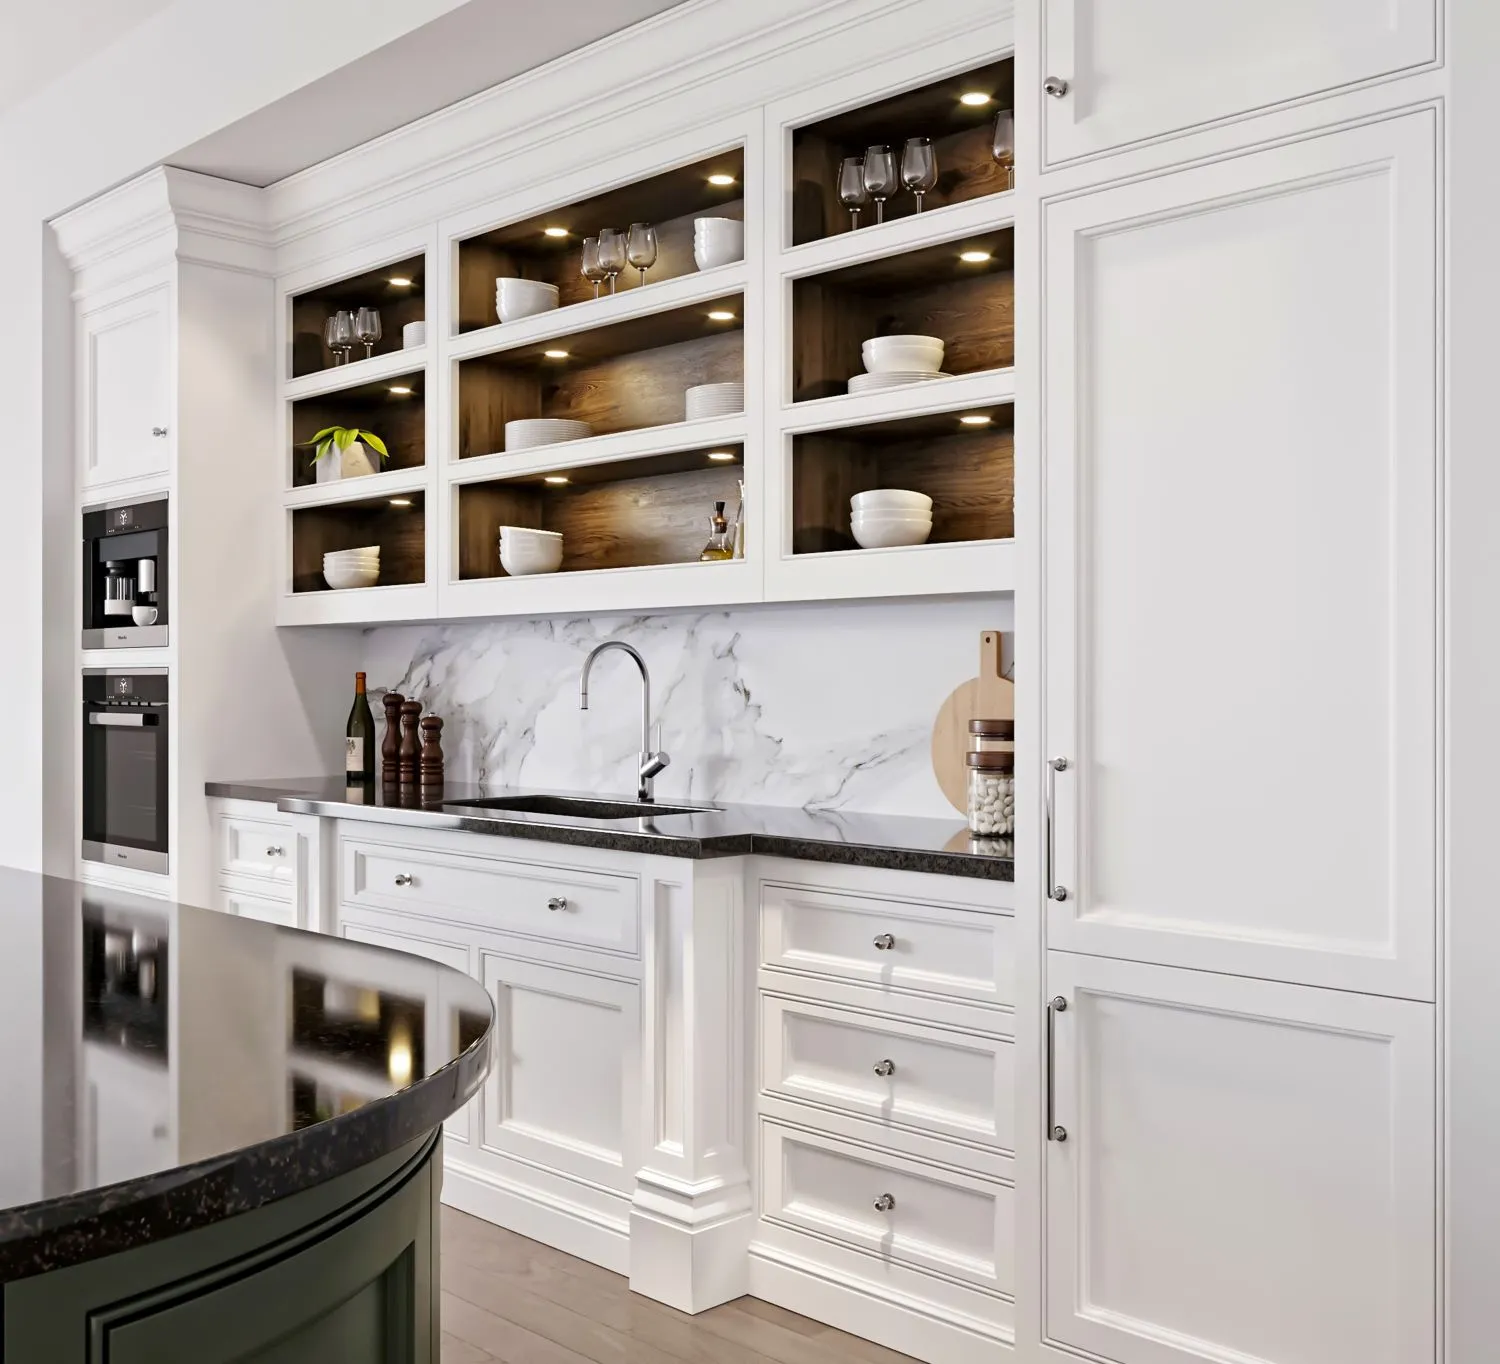 Adding pantry cabinets to your kitchen is a practical and effective way to enhance storage space